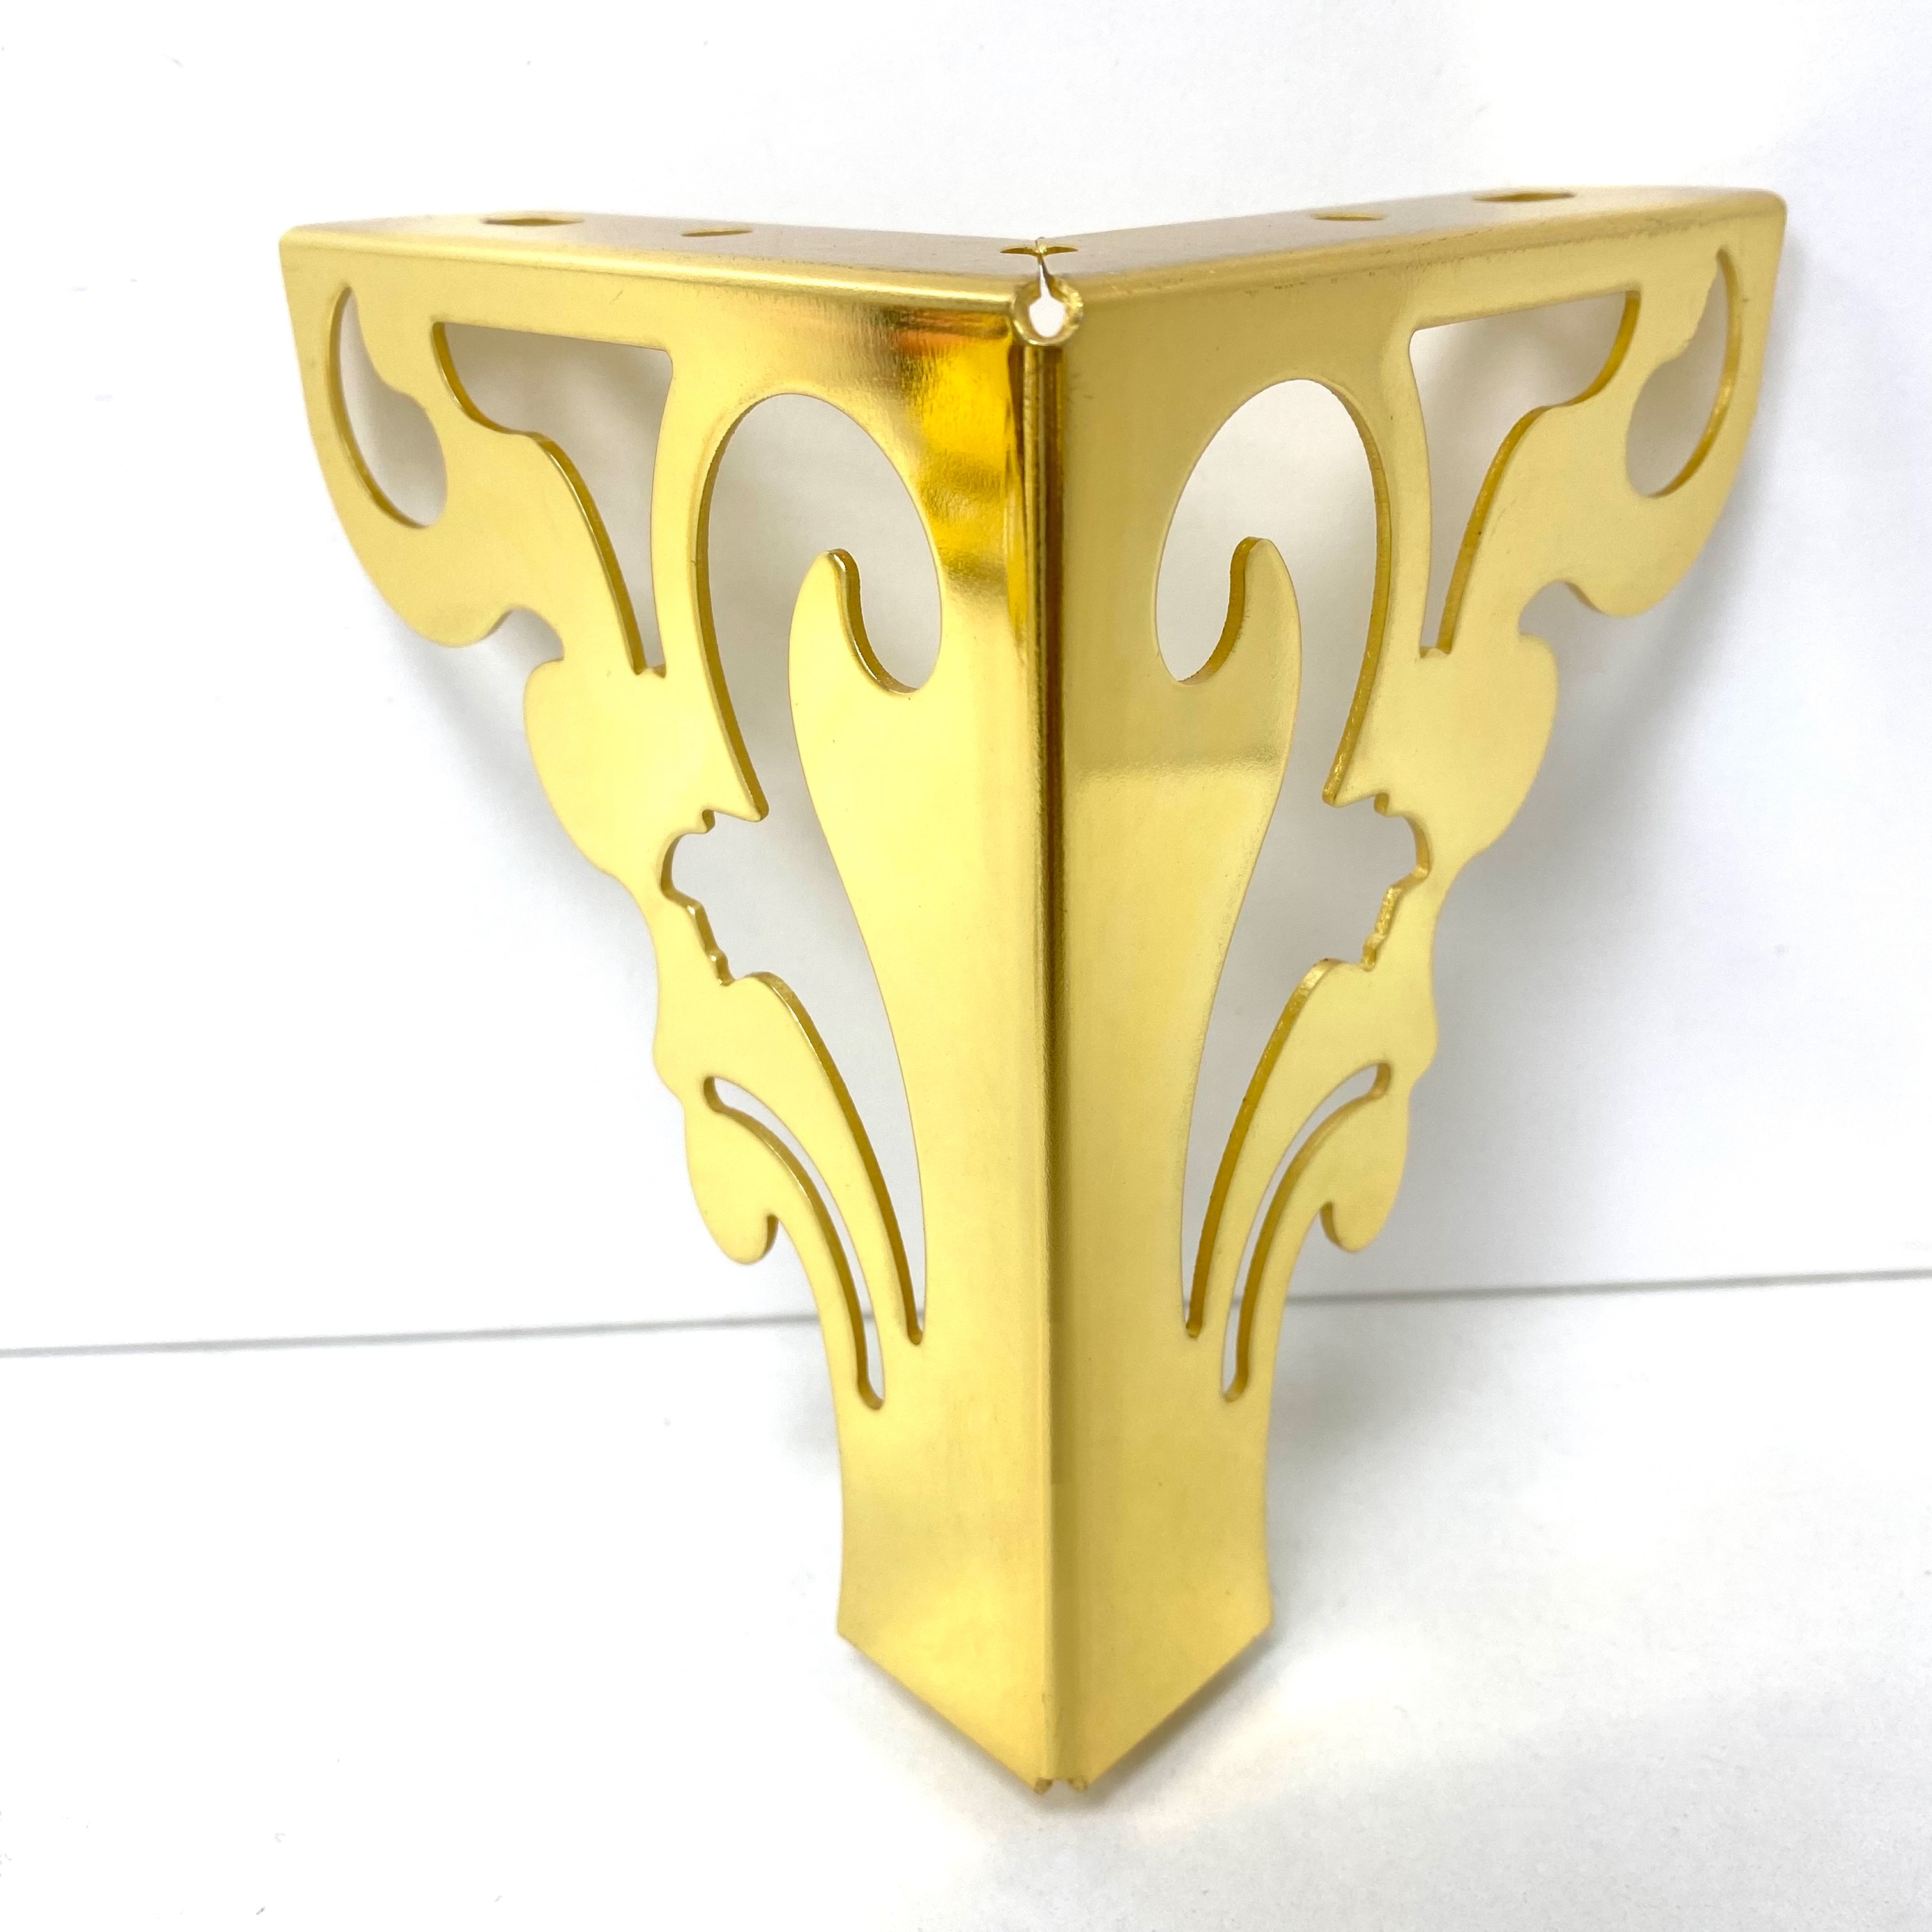 13cm Gold Hollow T shape sofa foot for furniture cabinet